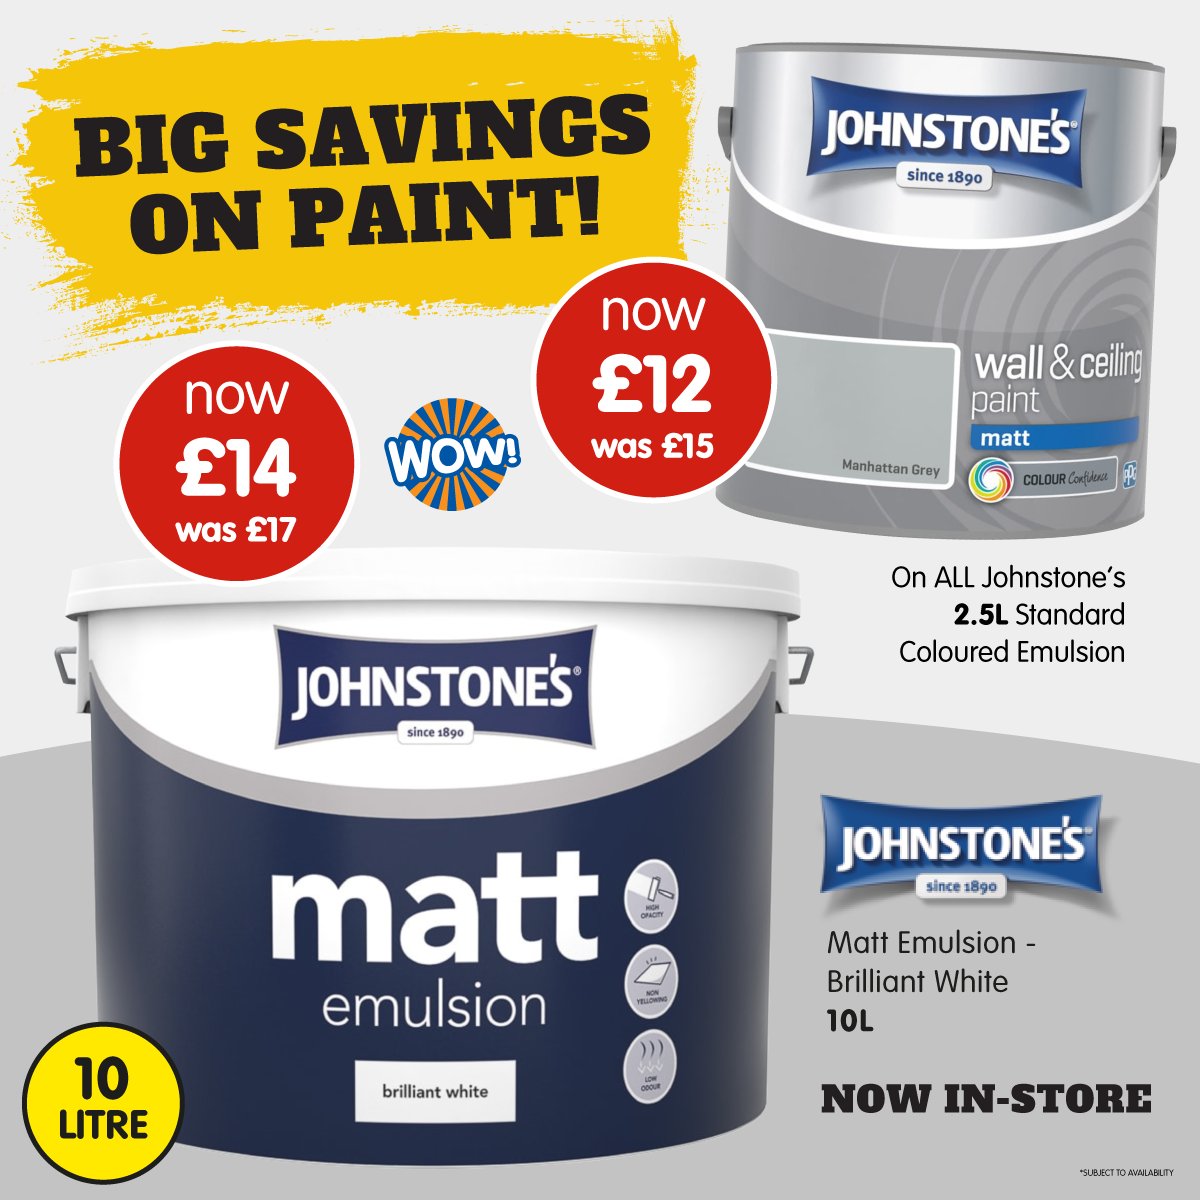 We've got a brilliant saving on @Johnstoneuk’s paints in-stores currently💖! ALL 2.5L standard coloured emulsion is now only £12 - while the 10L Brilliant White Matt Emulsion is just £14✨! Which room do you need to paint next?